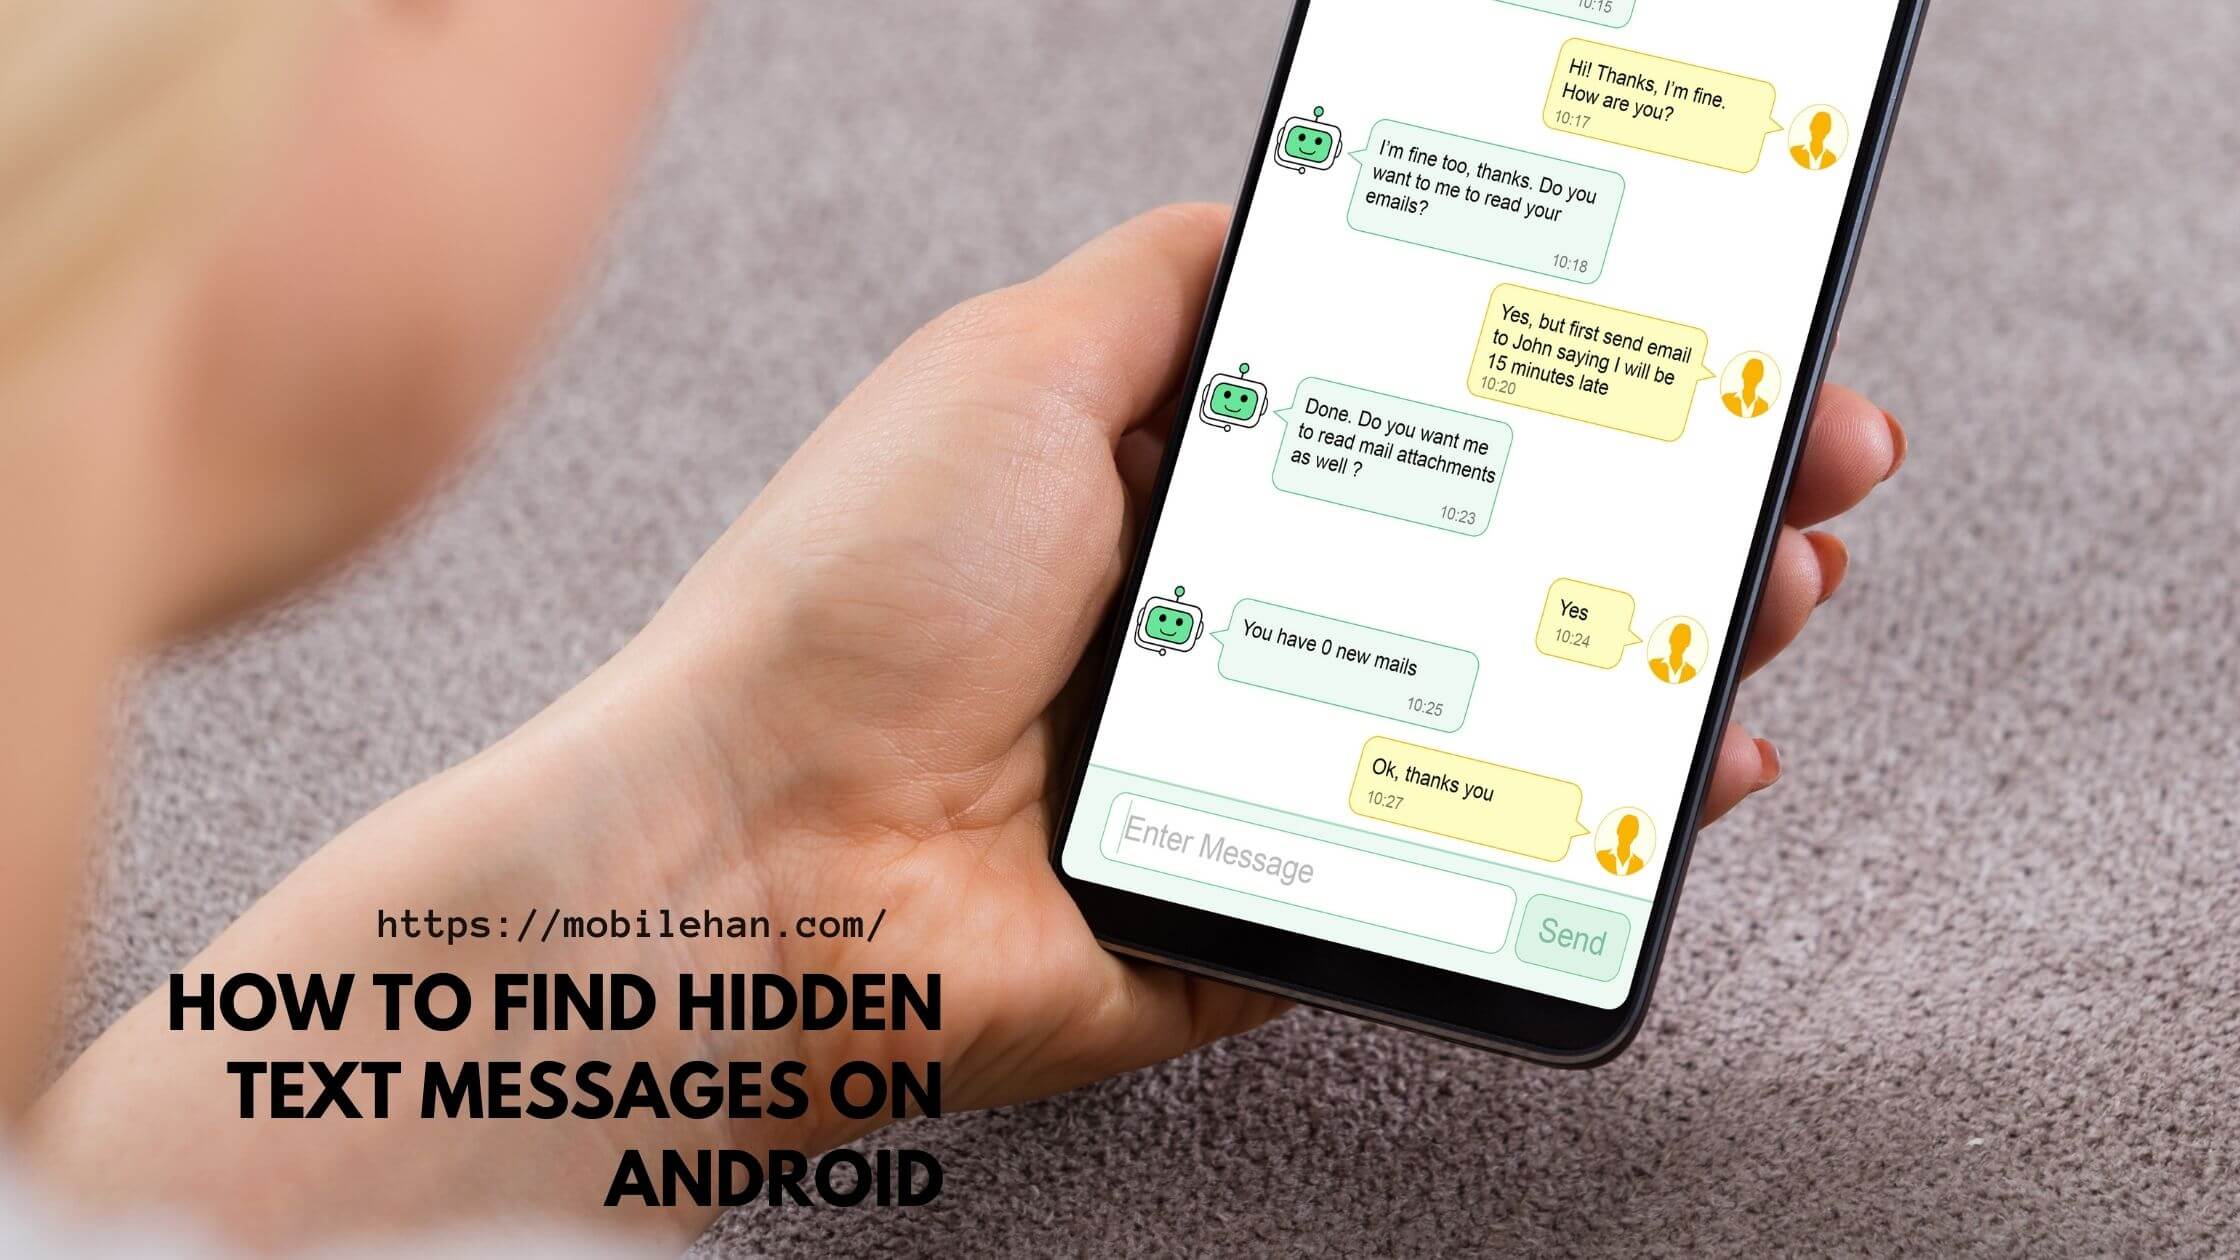 How To Find Hidden Text Messages on Android Phone